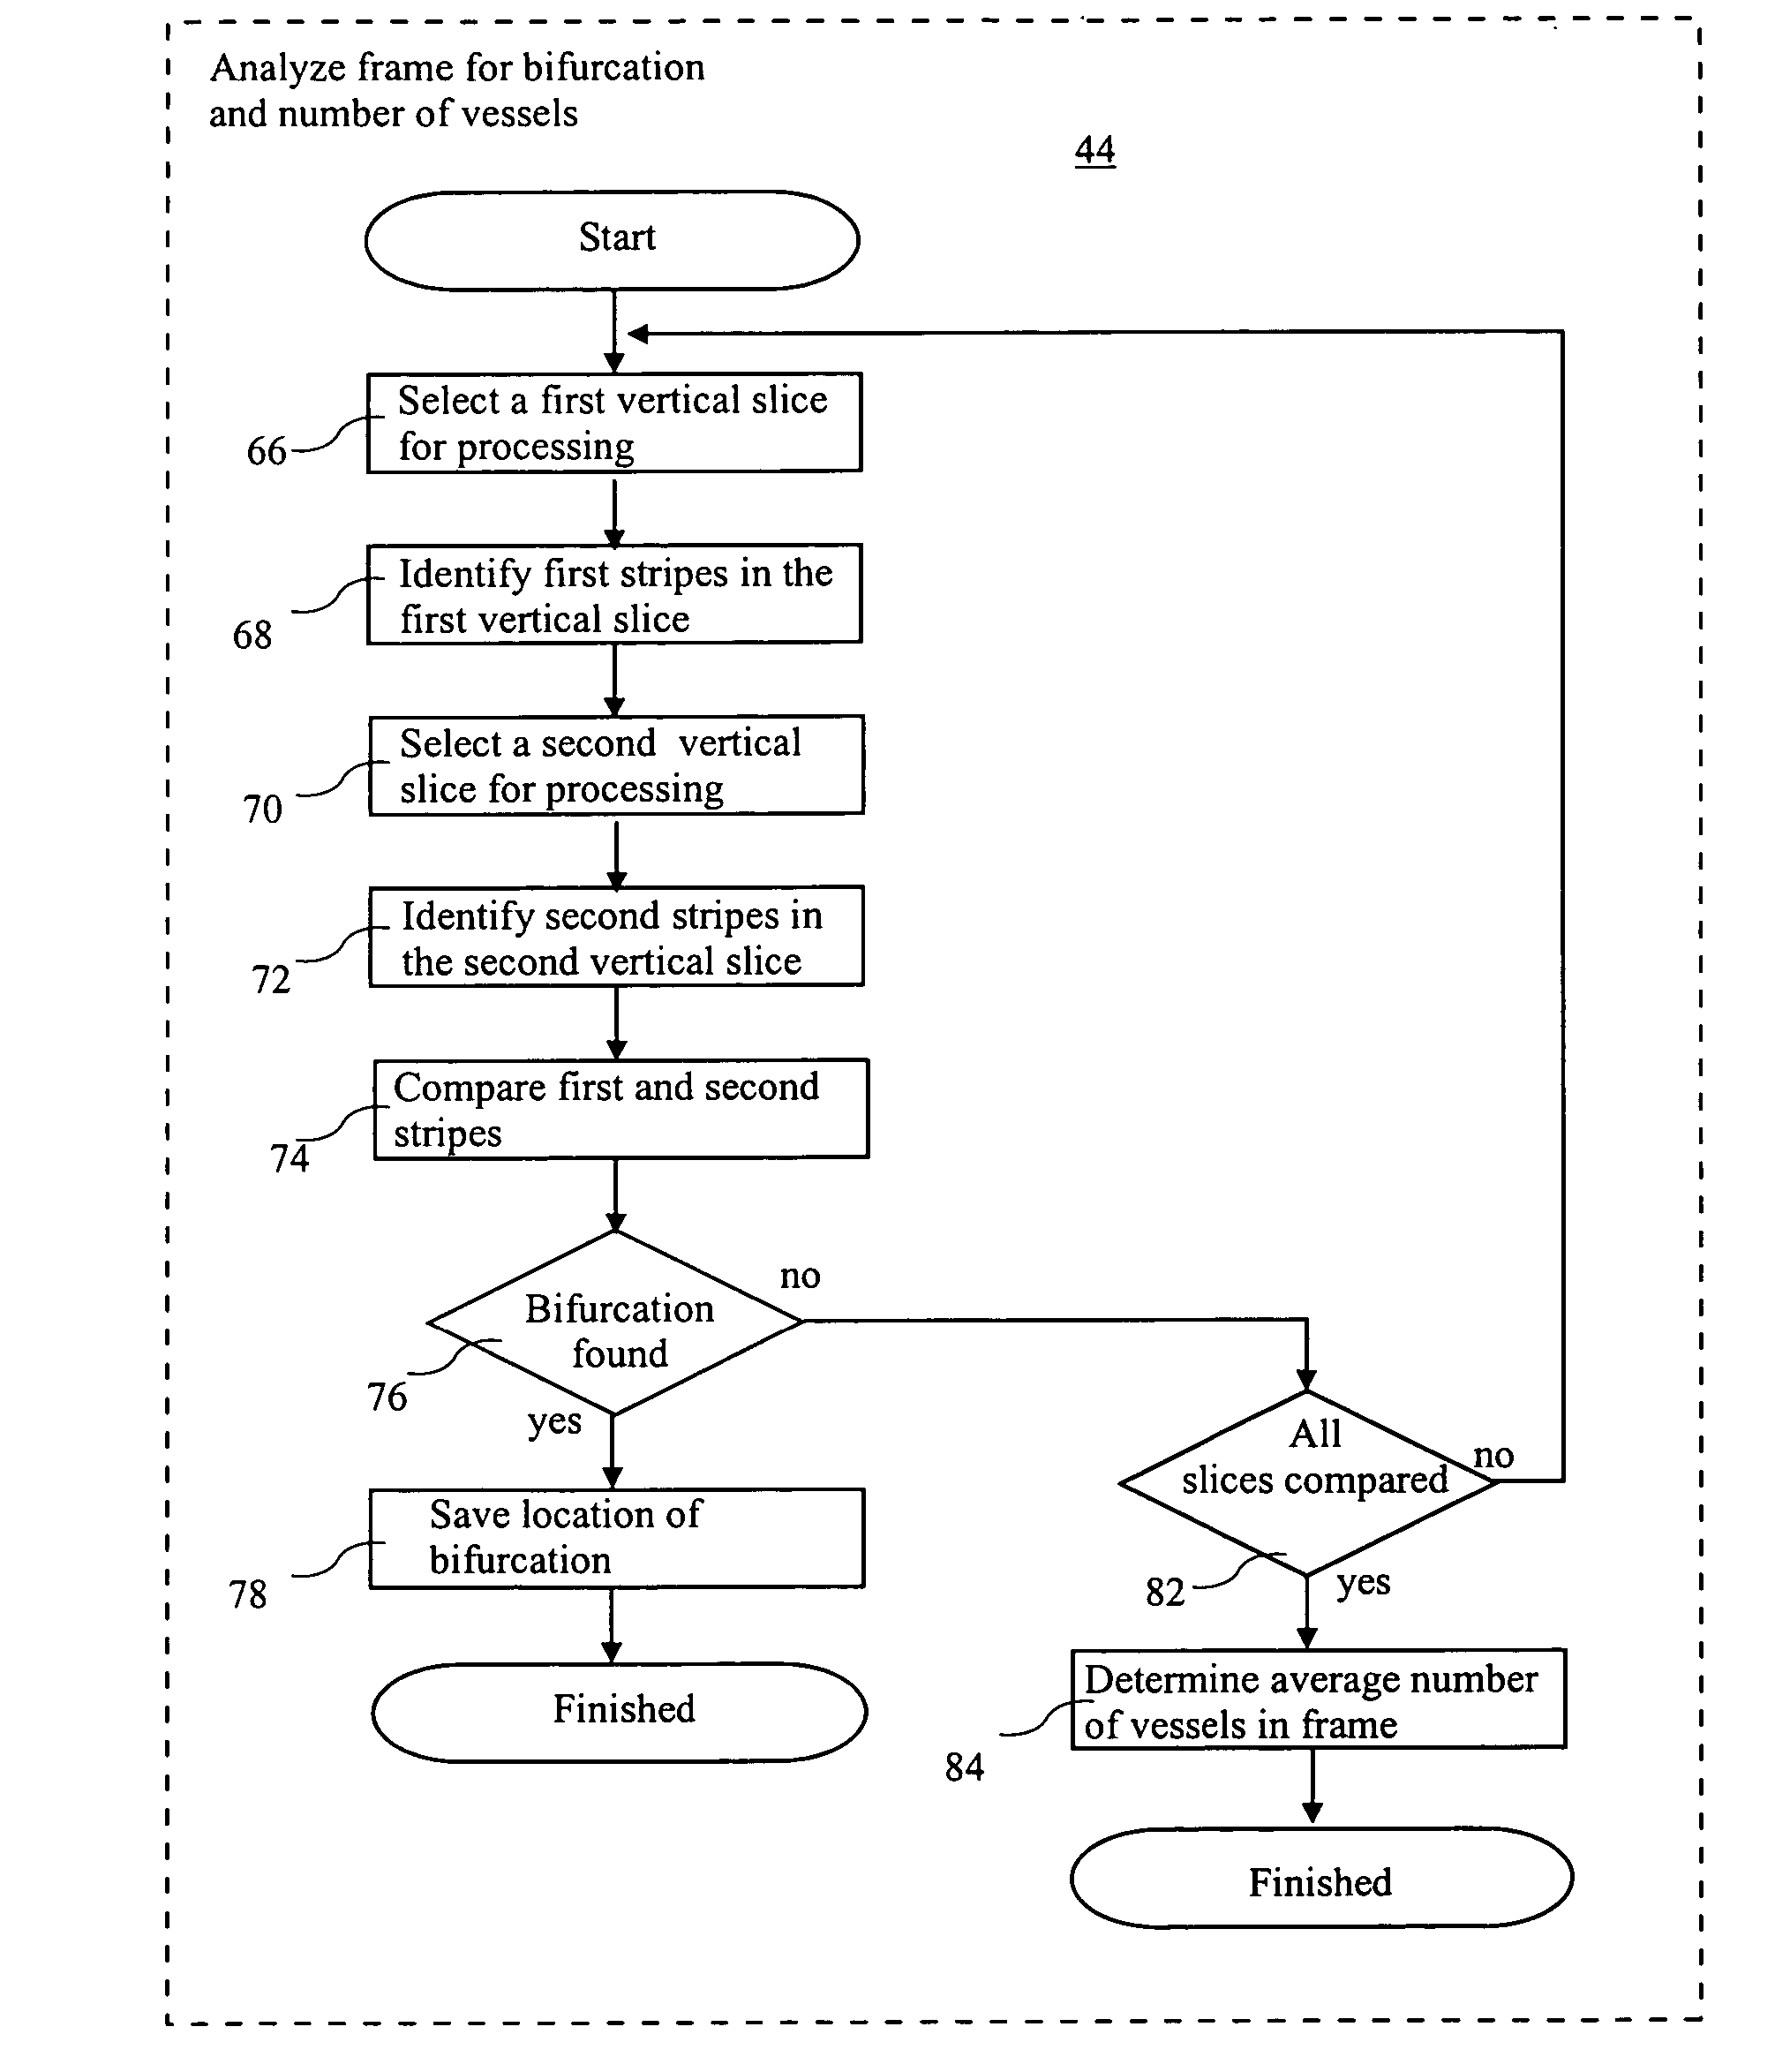 System and method for automatic determination of a region of interest within an image